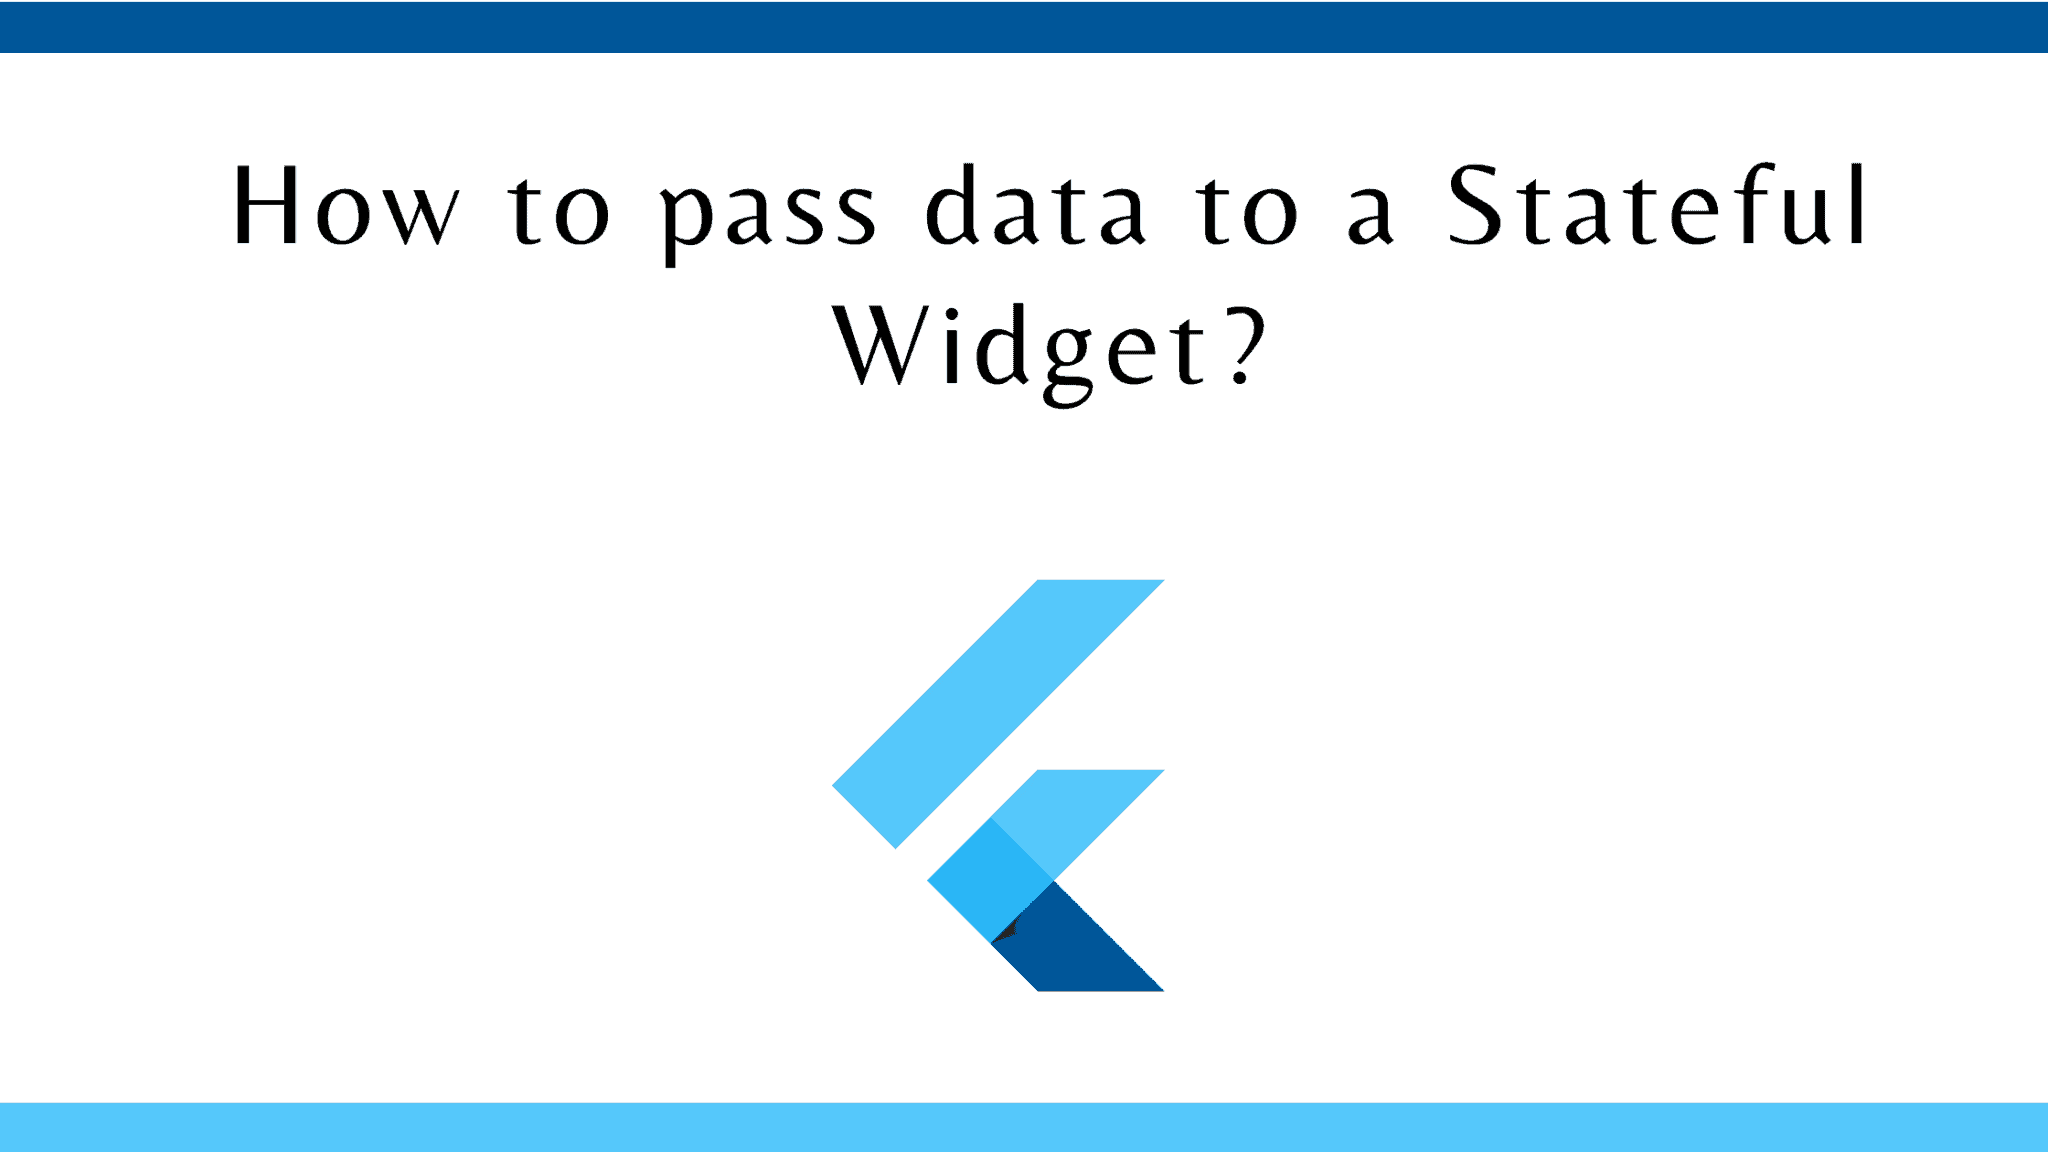 How to pass data to a Stateful Widget?